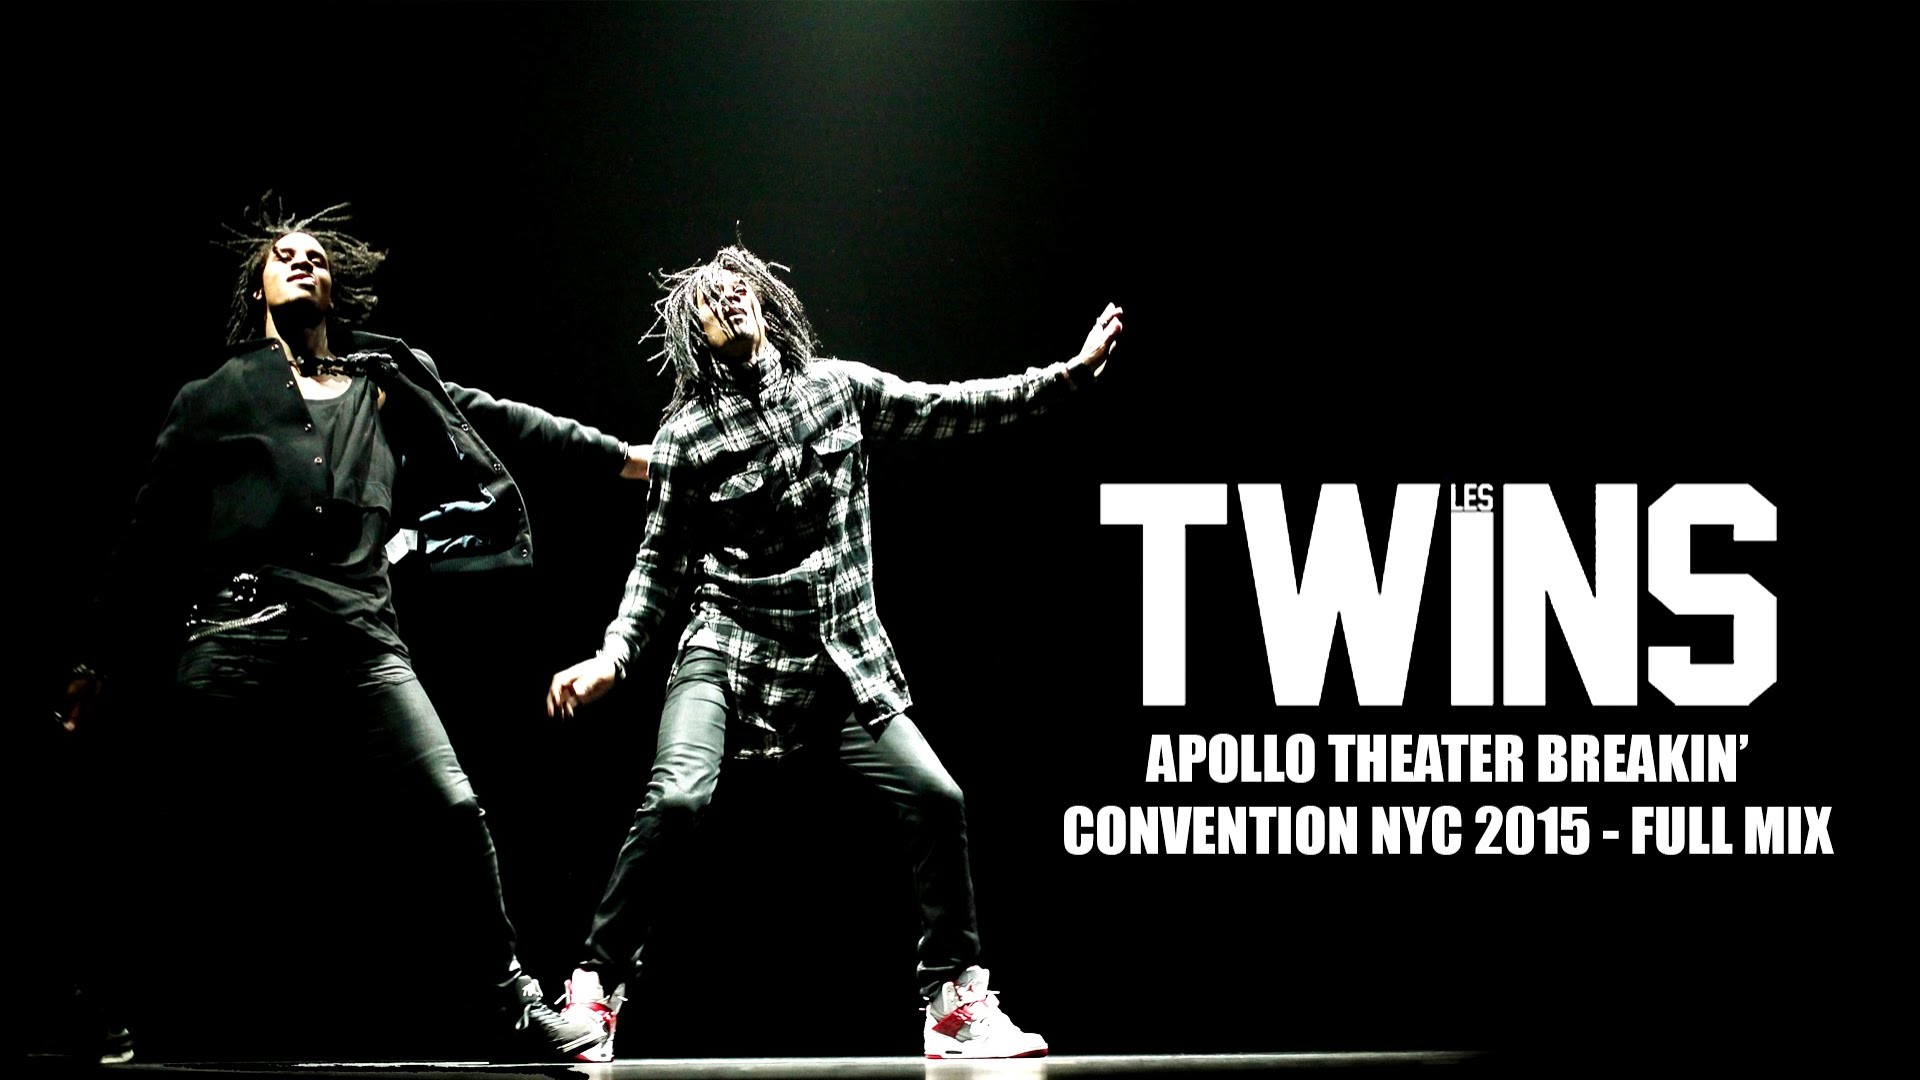 1920x1080 LES TWINS - Apollo Theater Breakin' Convention NYC 2015 - FULL MIX